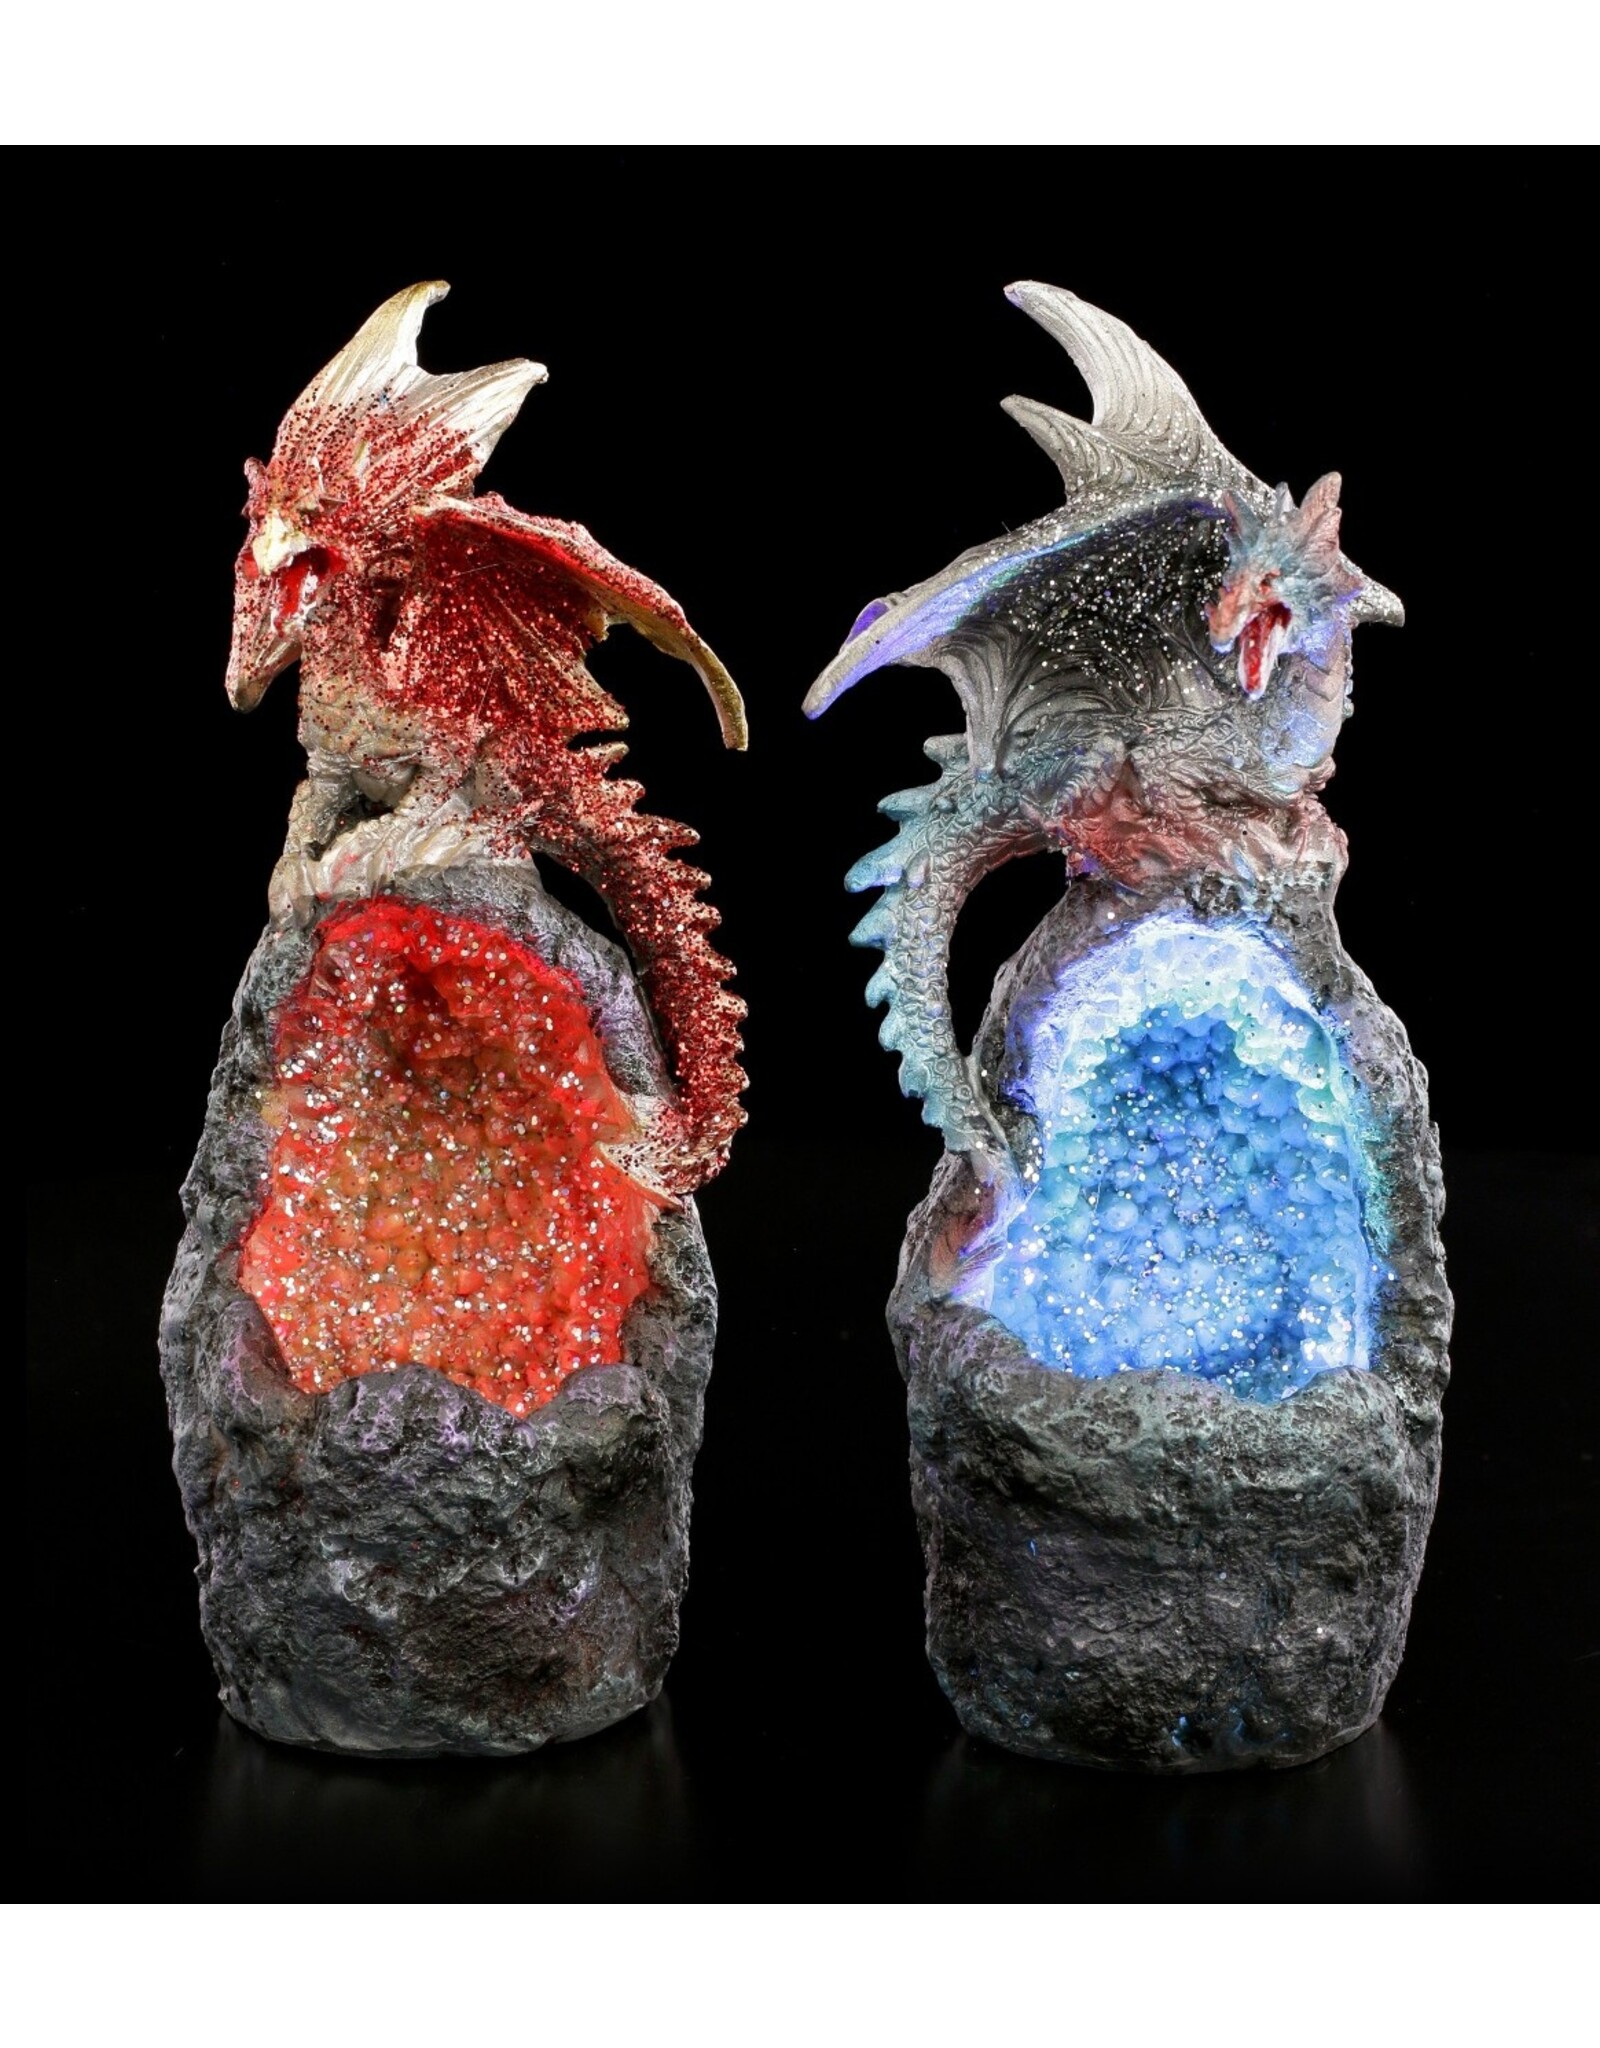 VG Giftware & Lifestyle - Dragon sitting on rock with LED light - set of 2 red/blue